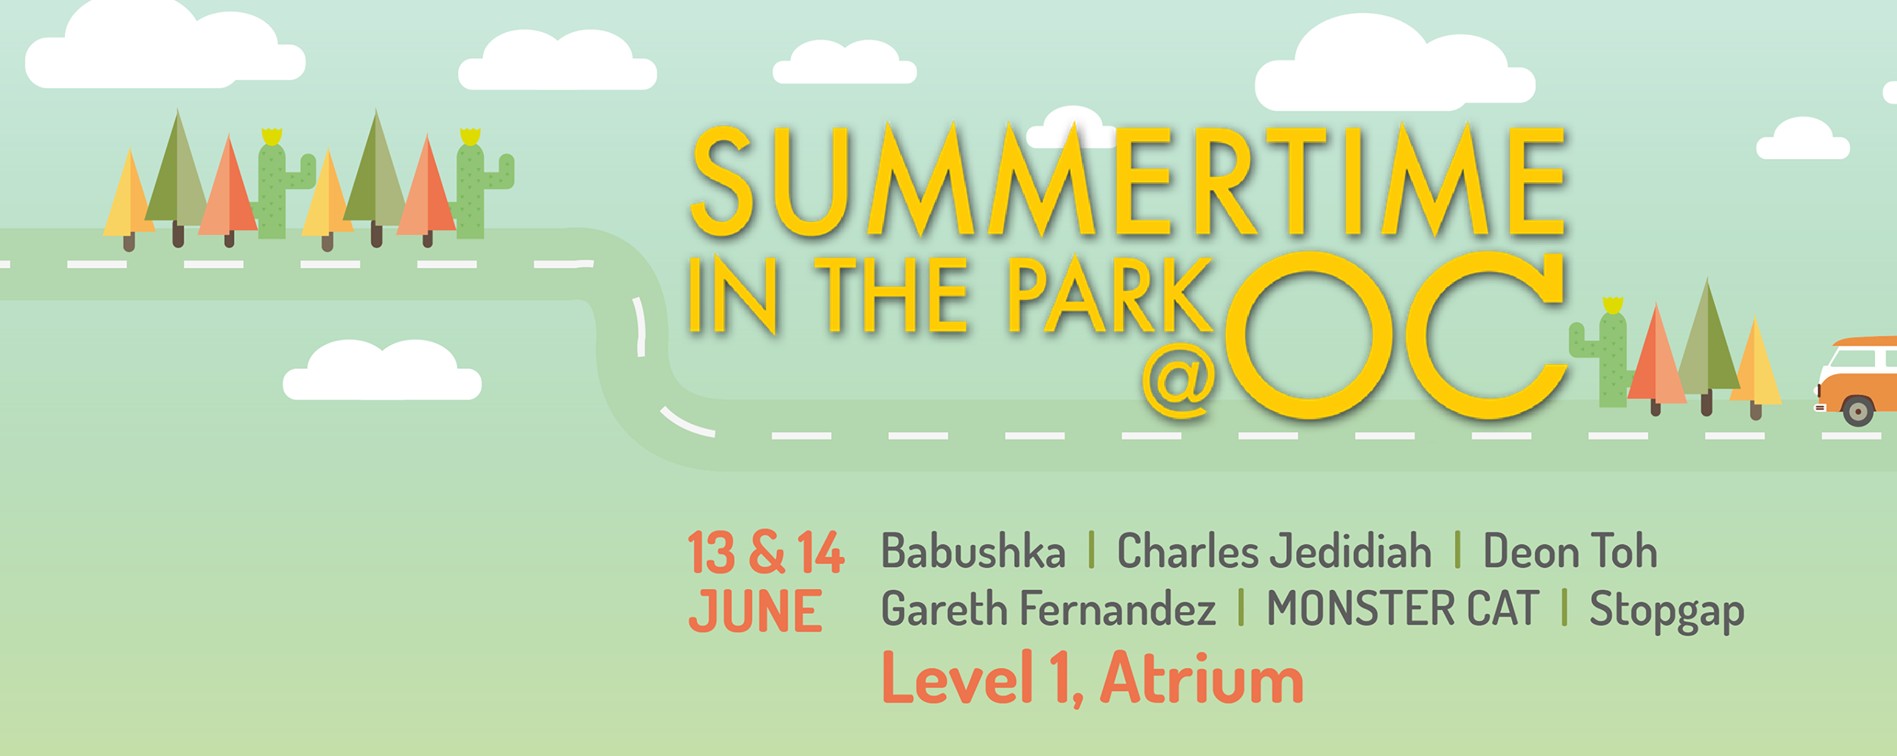 Summertime in the Park @ OC by Bandwagon